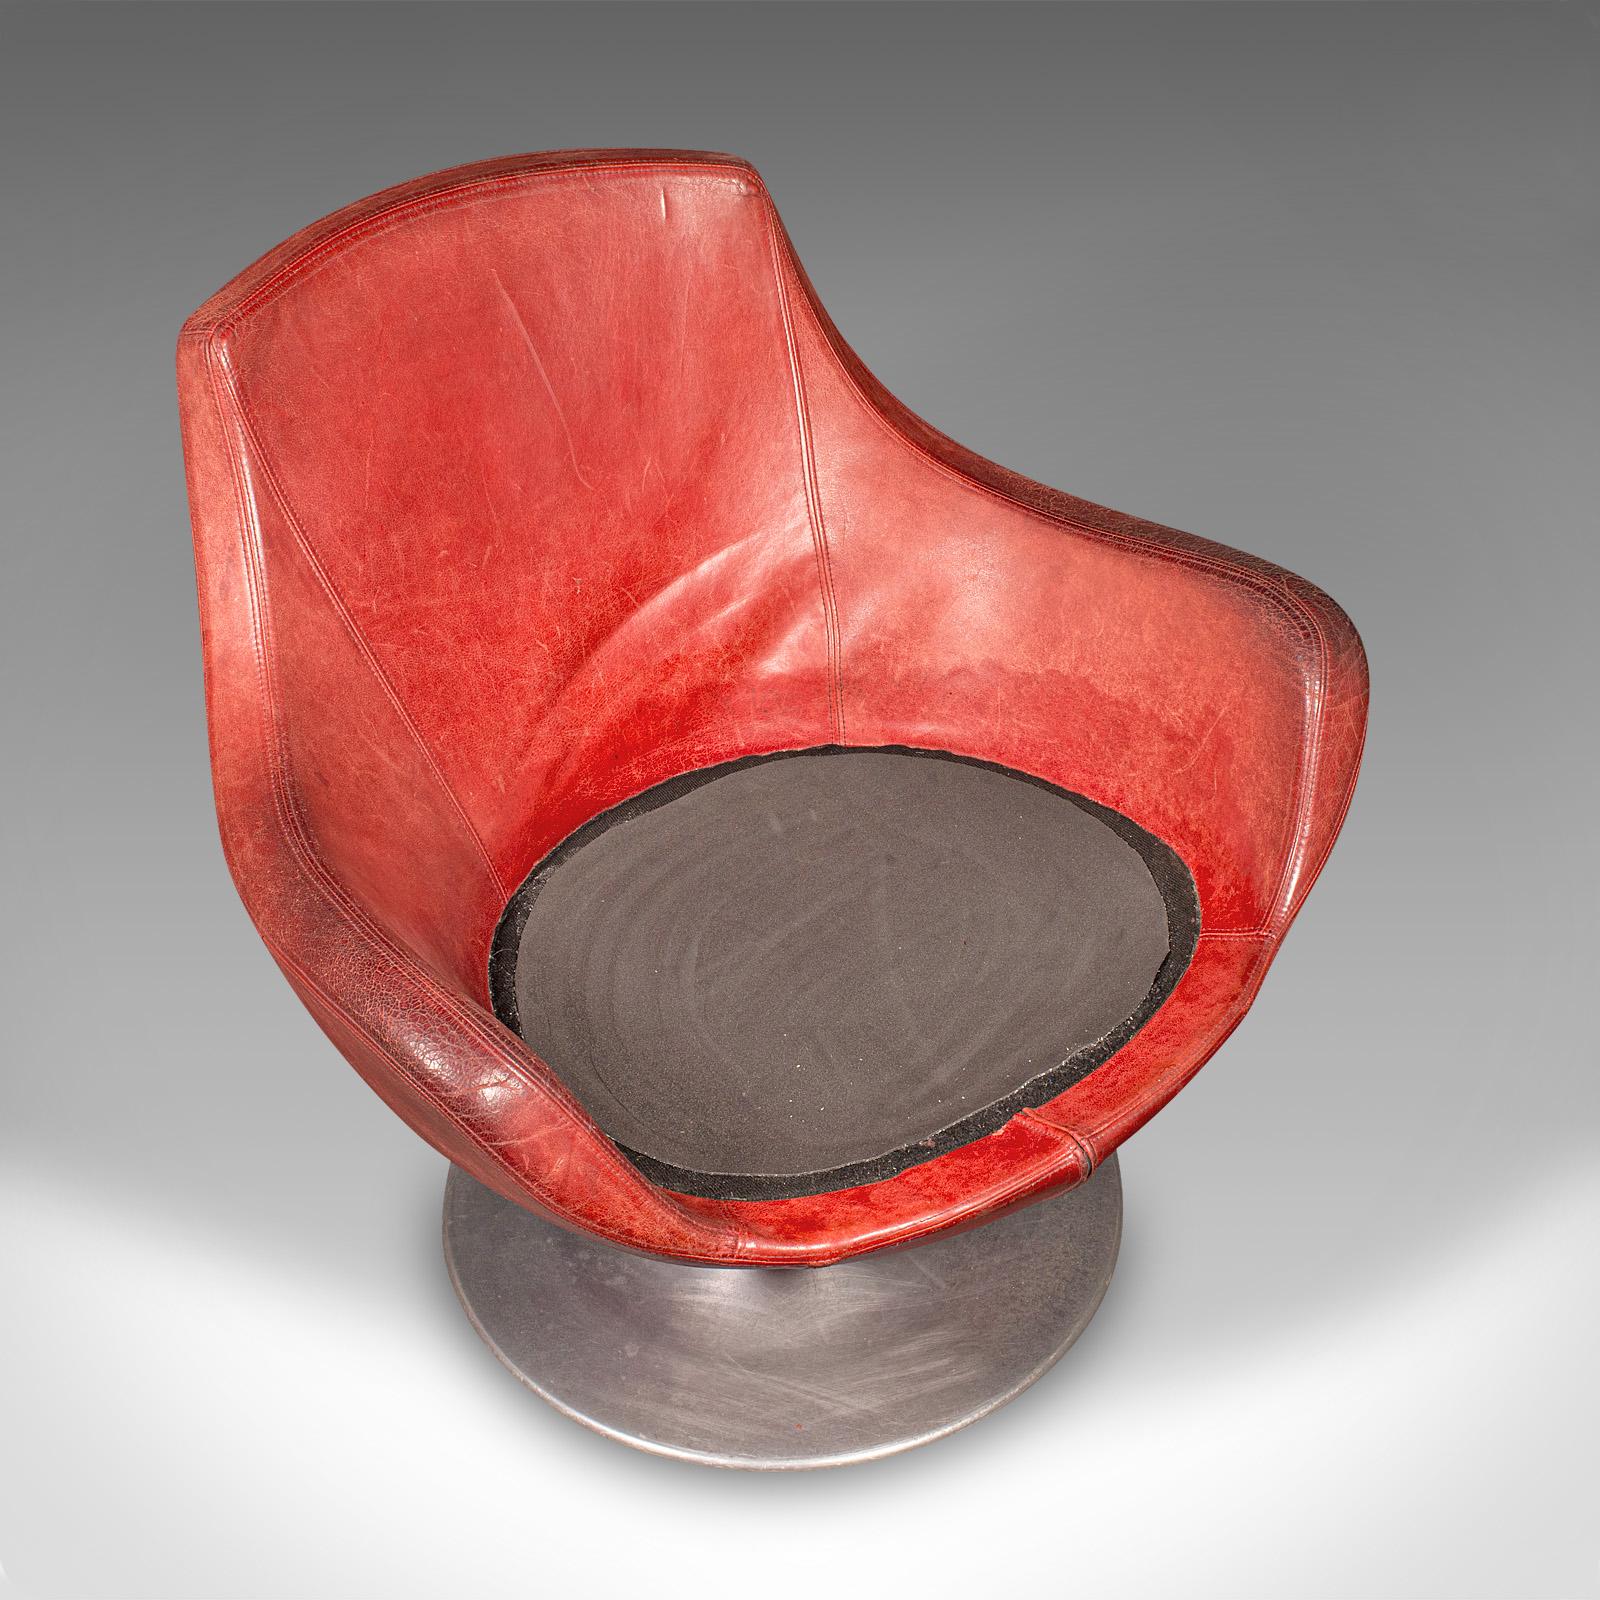 Vintage Swivel Tub Chair, Italian Leather Lounge Seat, Late 20th Century, C.1970 For Sale 3